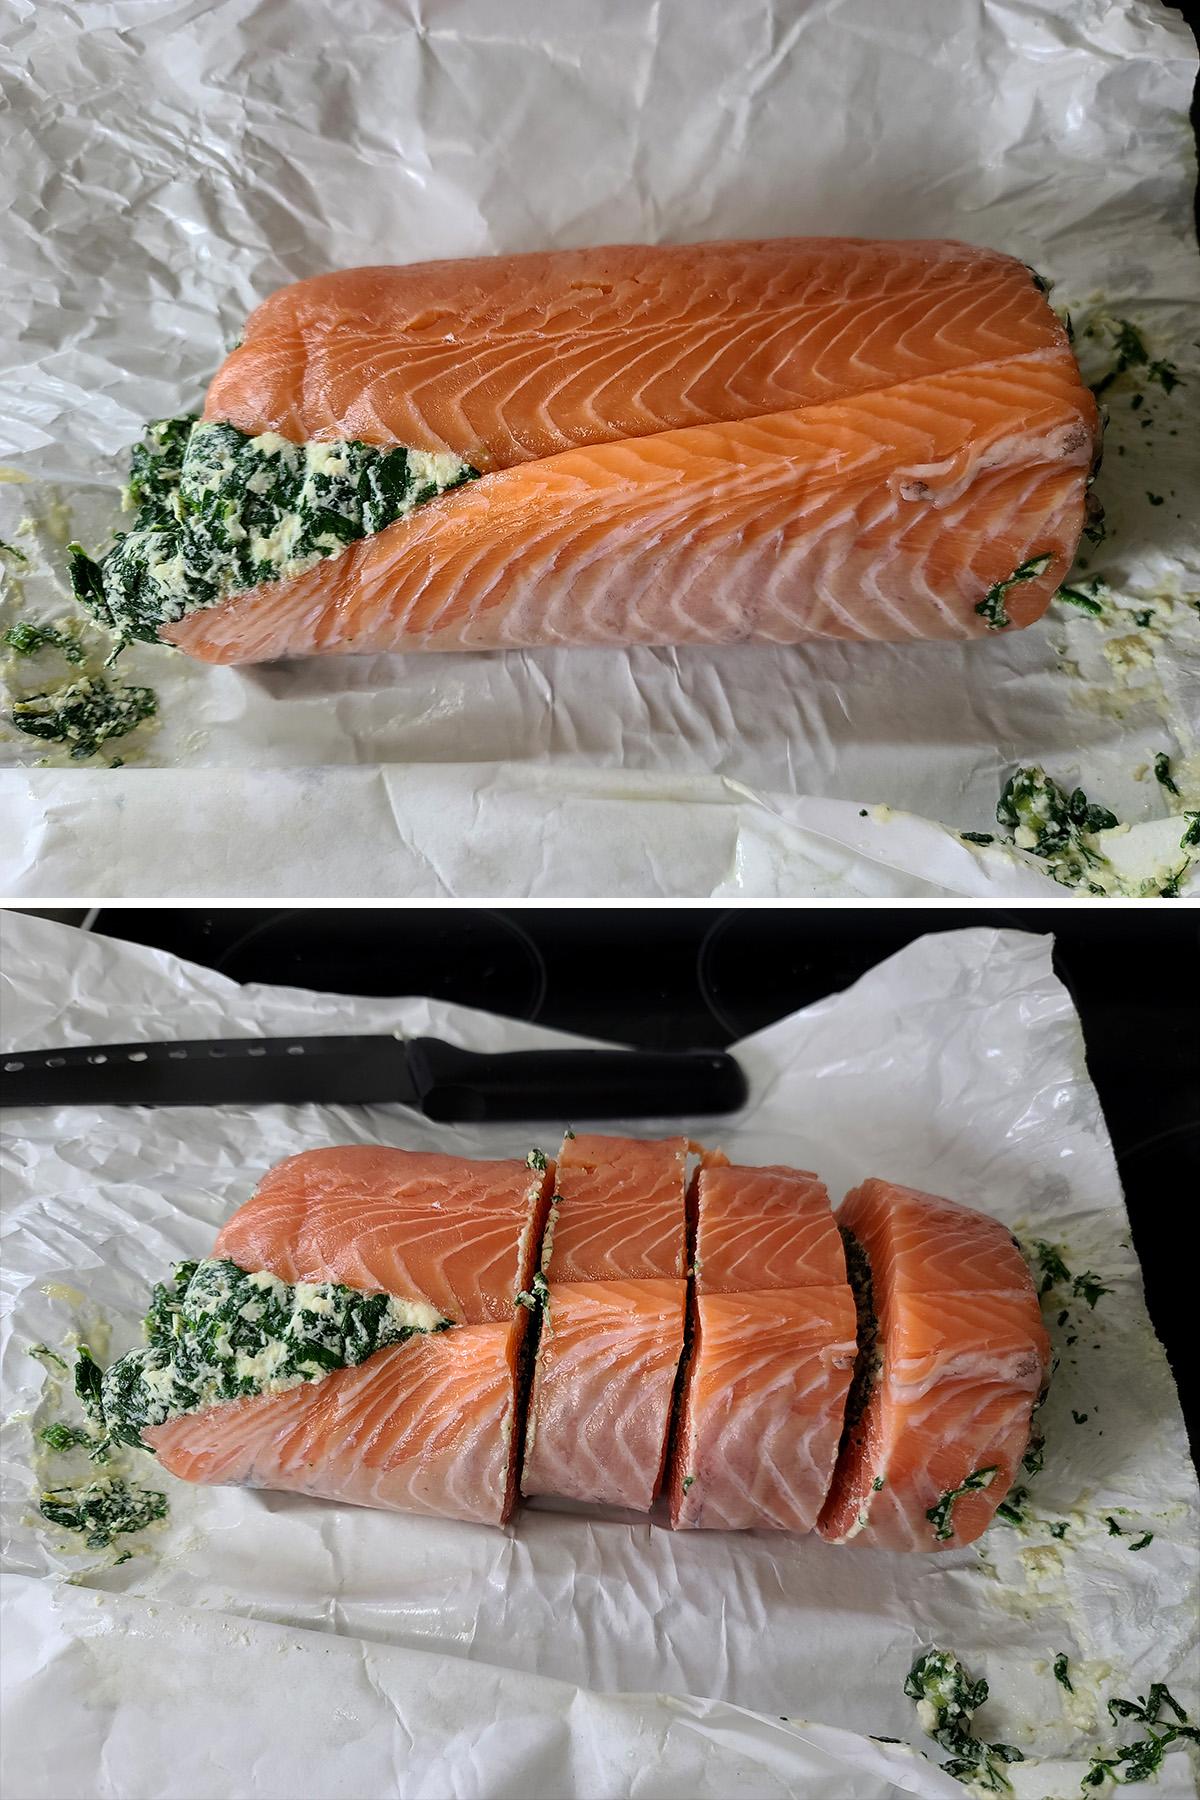 The chilled roll of salmon being sliced into rounds.